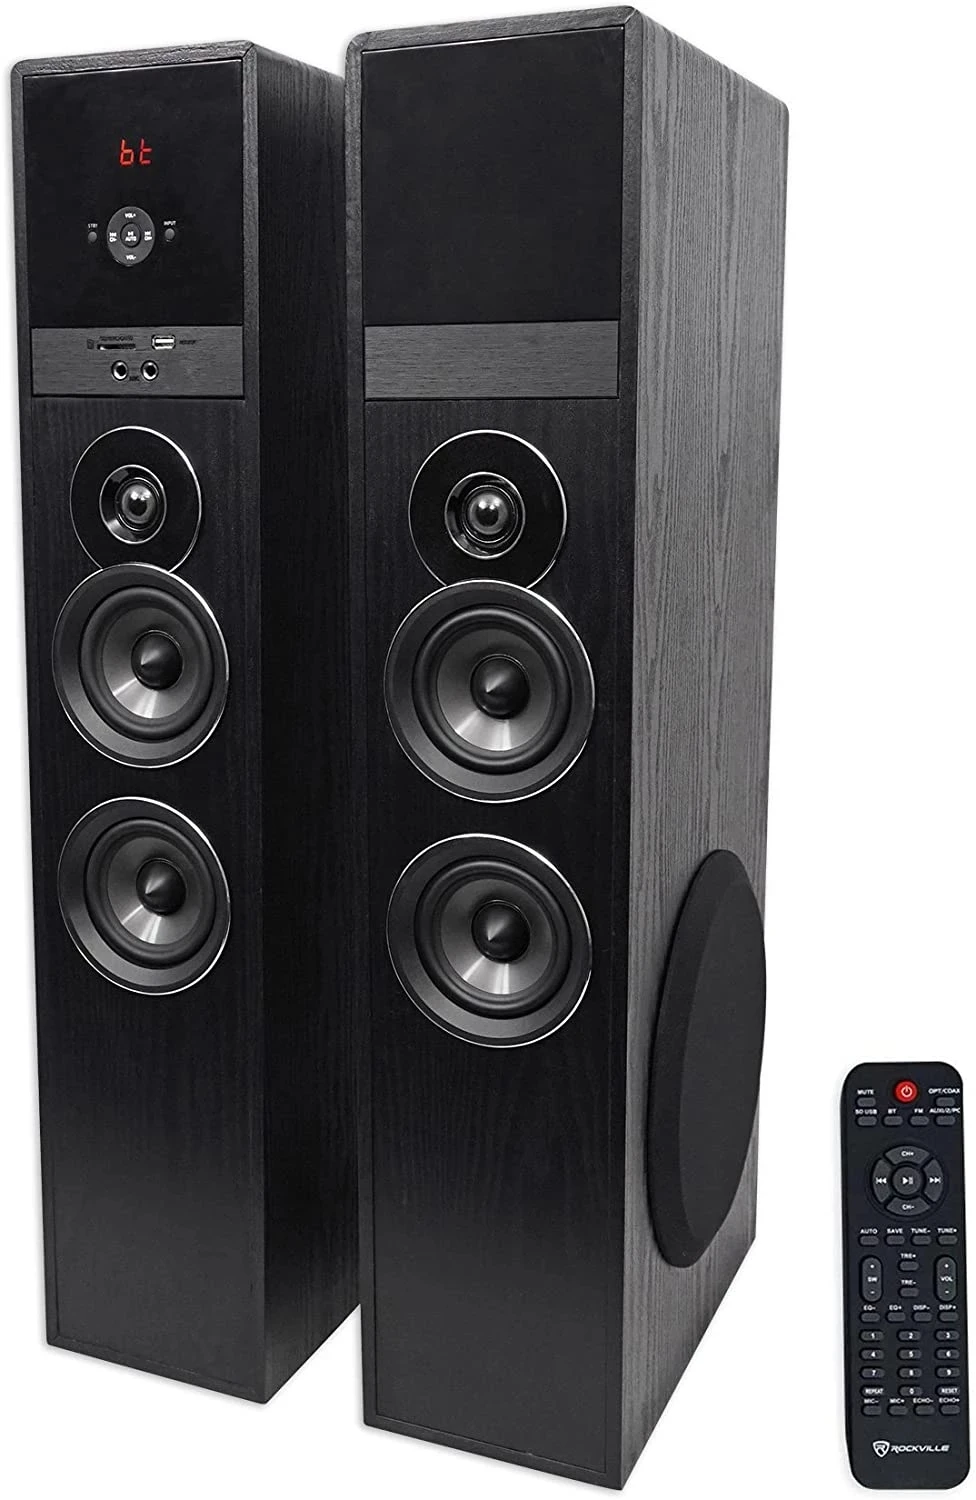 

2022 New Rockville TM80B Black Home Theater System Tower Speakers 8" Sub/Bluetooth/USB Metal wall plate